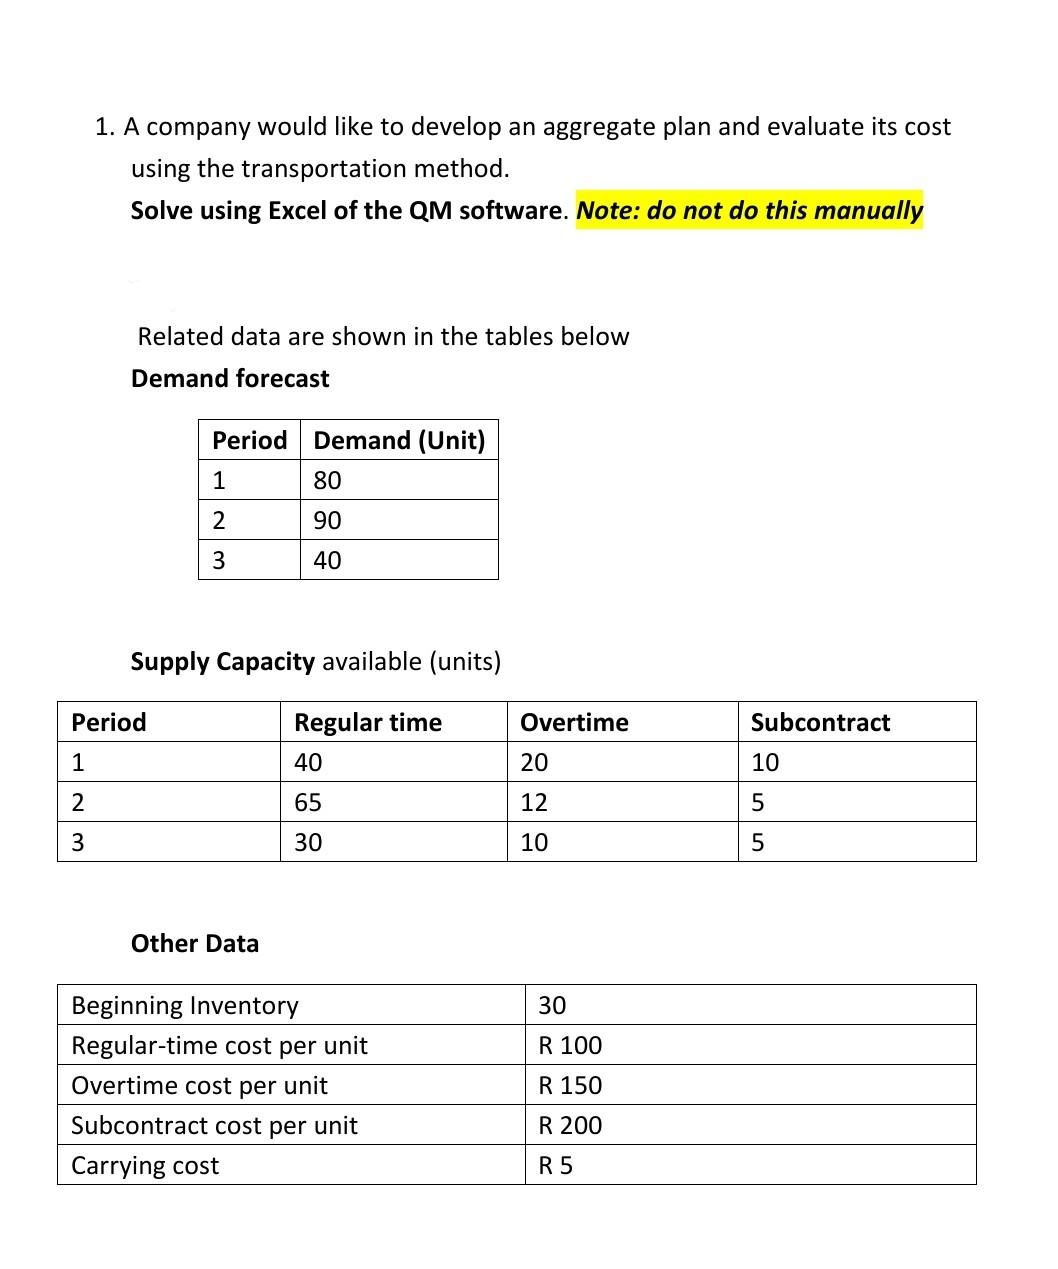 1. A company would like to develop an aggregate plan and evaluate its cost
using the transportation method.
Solve using Excel of the QM software. Note: do not do this manually
Related data are shown in the tables below
Demand forecast
Period Demand (Unit)
1
80
2
90
3
40
Supply Capacity available (units)
Regular time
40
65
30
Period
1
2
3
Other Data
Beginning Inventory
Regular-time cost per unit
Overtime cost per unit
Subcontract cost per unit
Carrying cost
Overtime
20
12
10
30
R 100
R 150
R 200
R 5
Subcontract
10
5
5